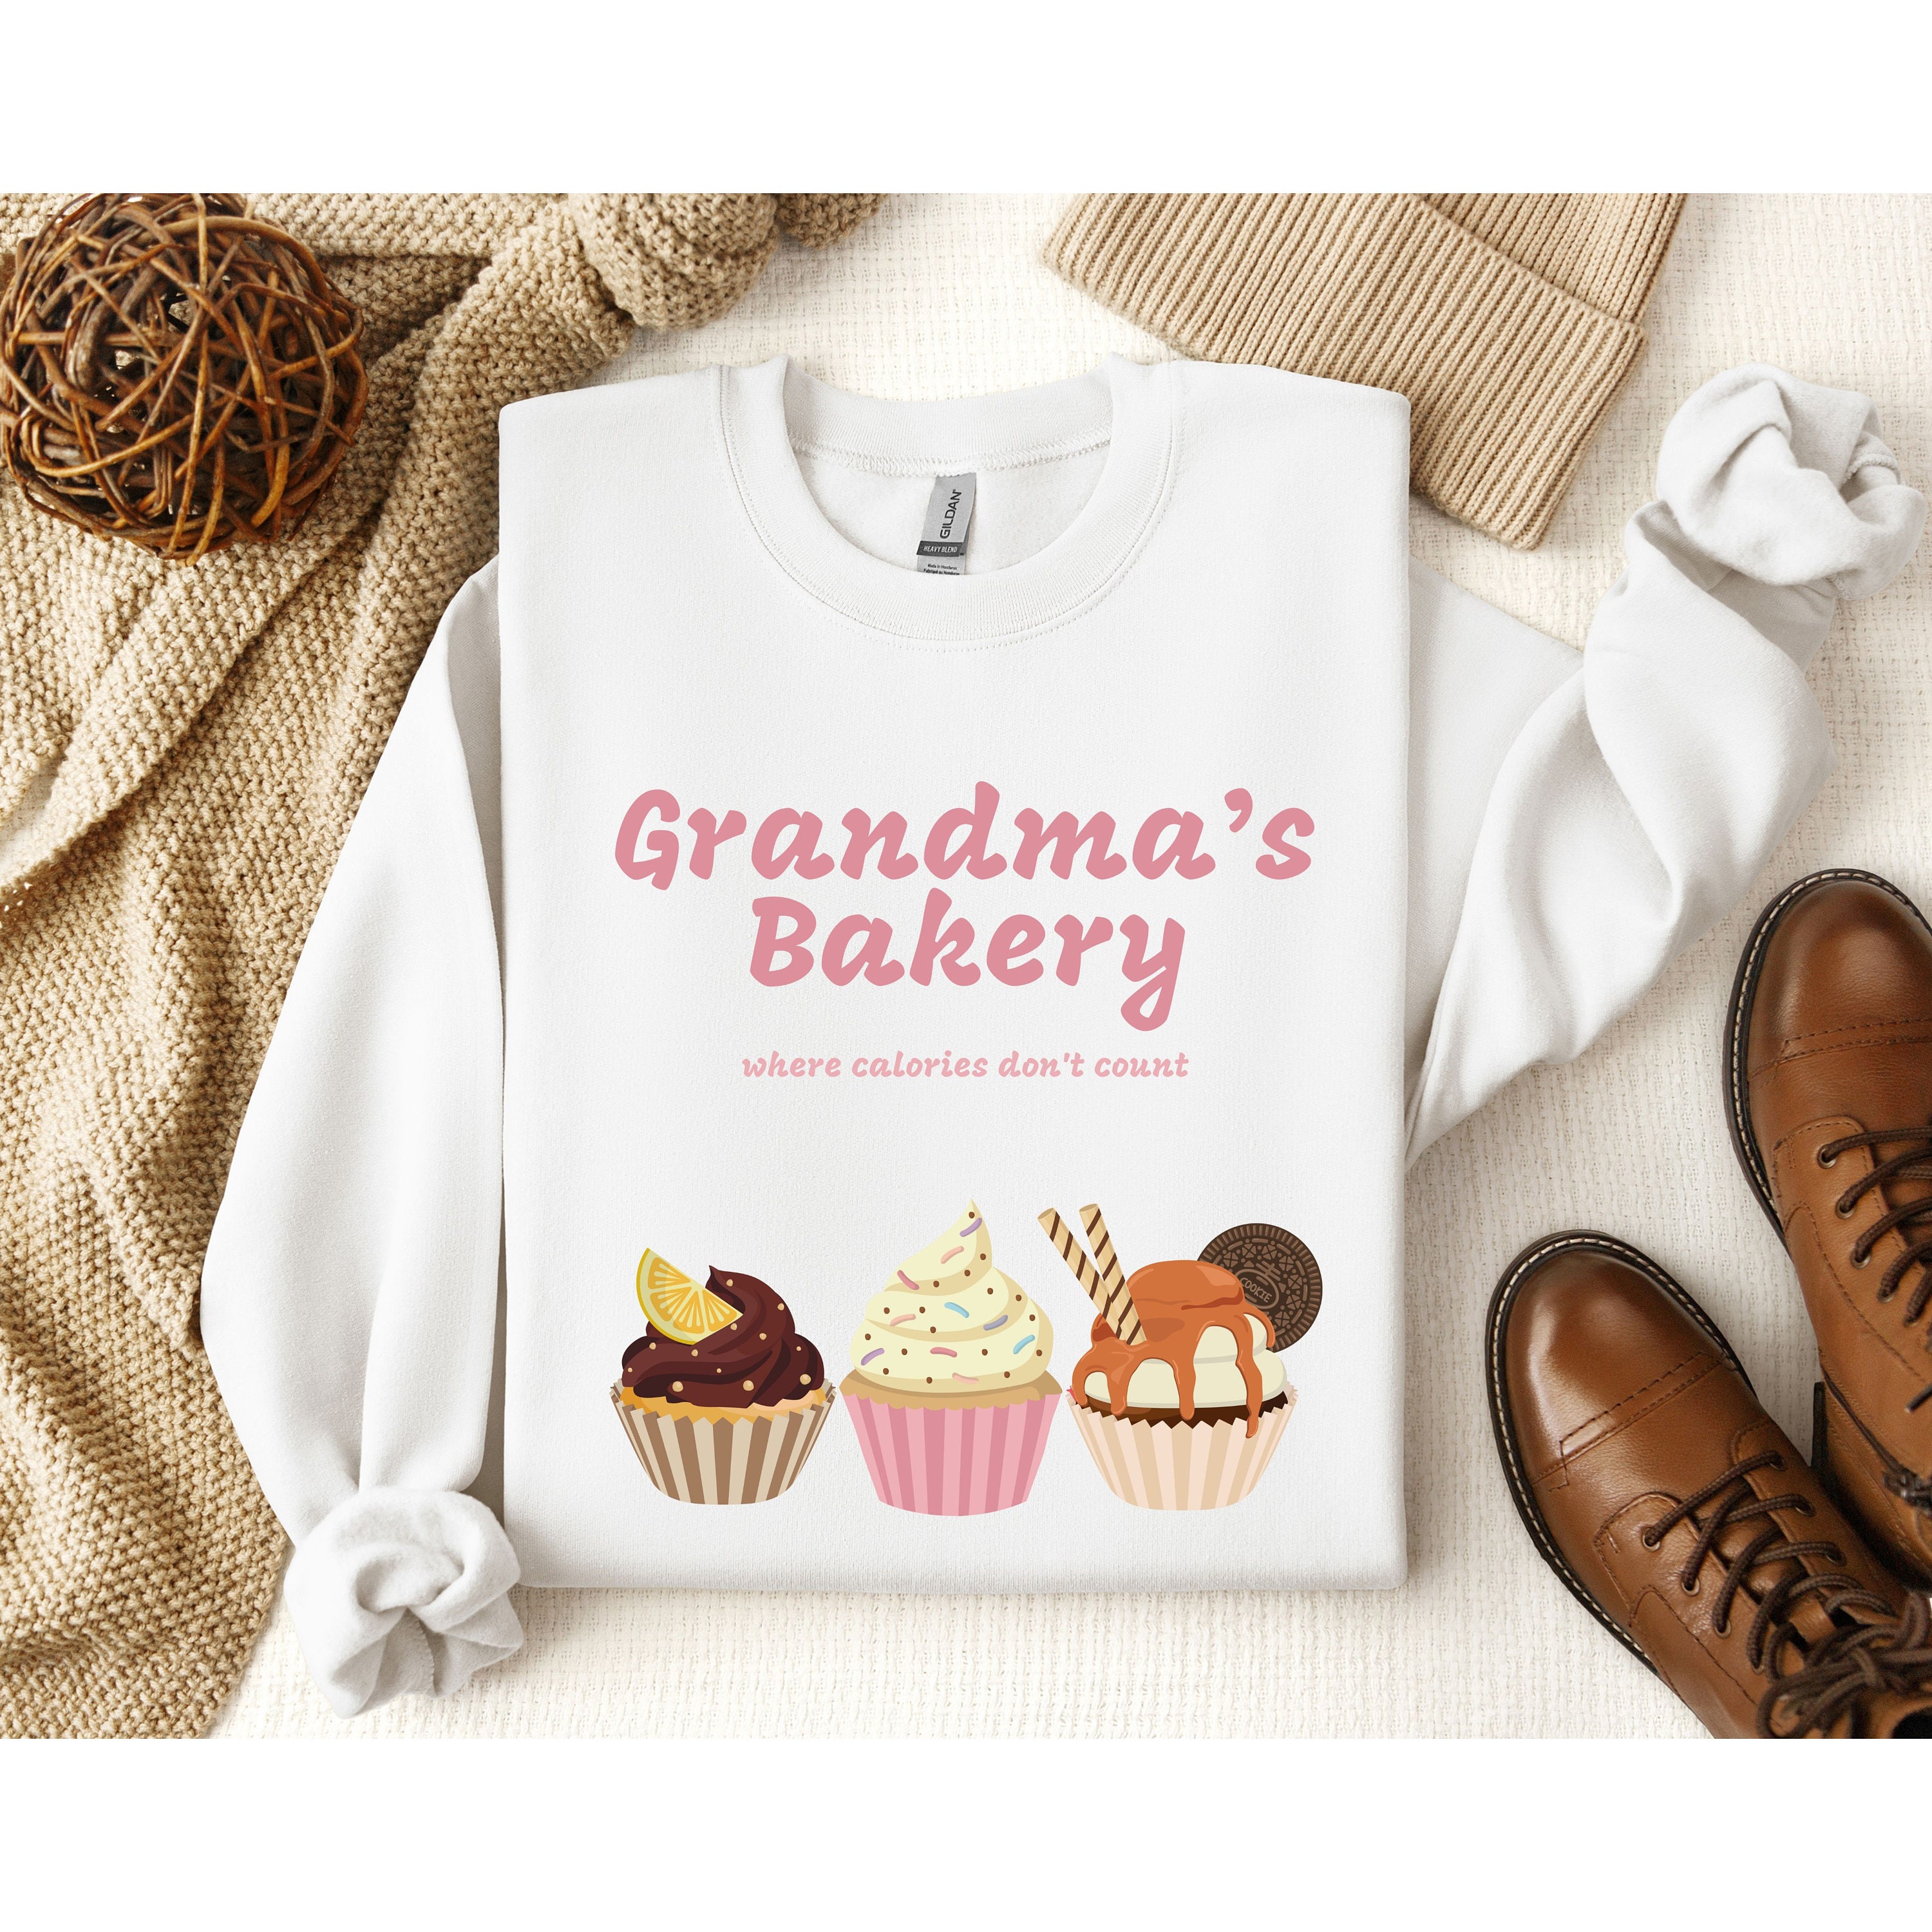 Funny Baking Gift for Women, Mom, Wife, Sister, Grandma, Cute Cooking Gifts  for Bakers, Friends, Dau…See more Funny Baking Gift for Women, Mom, Wife